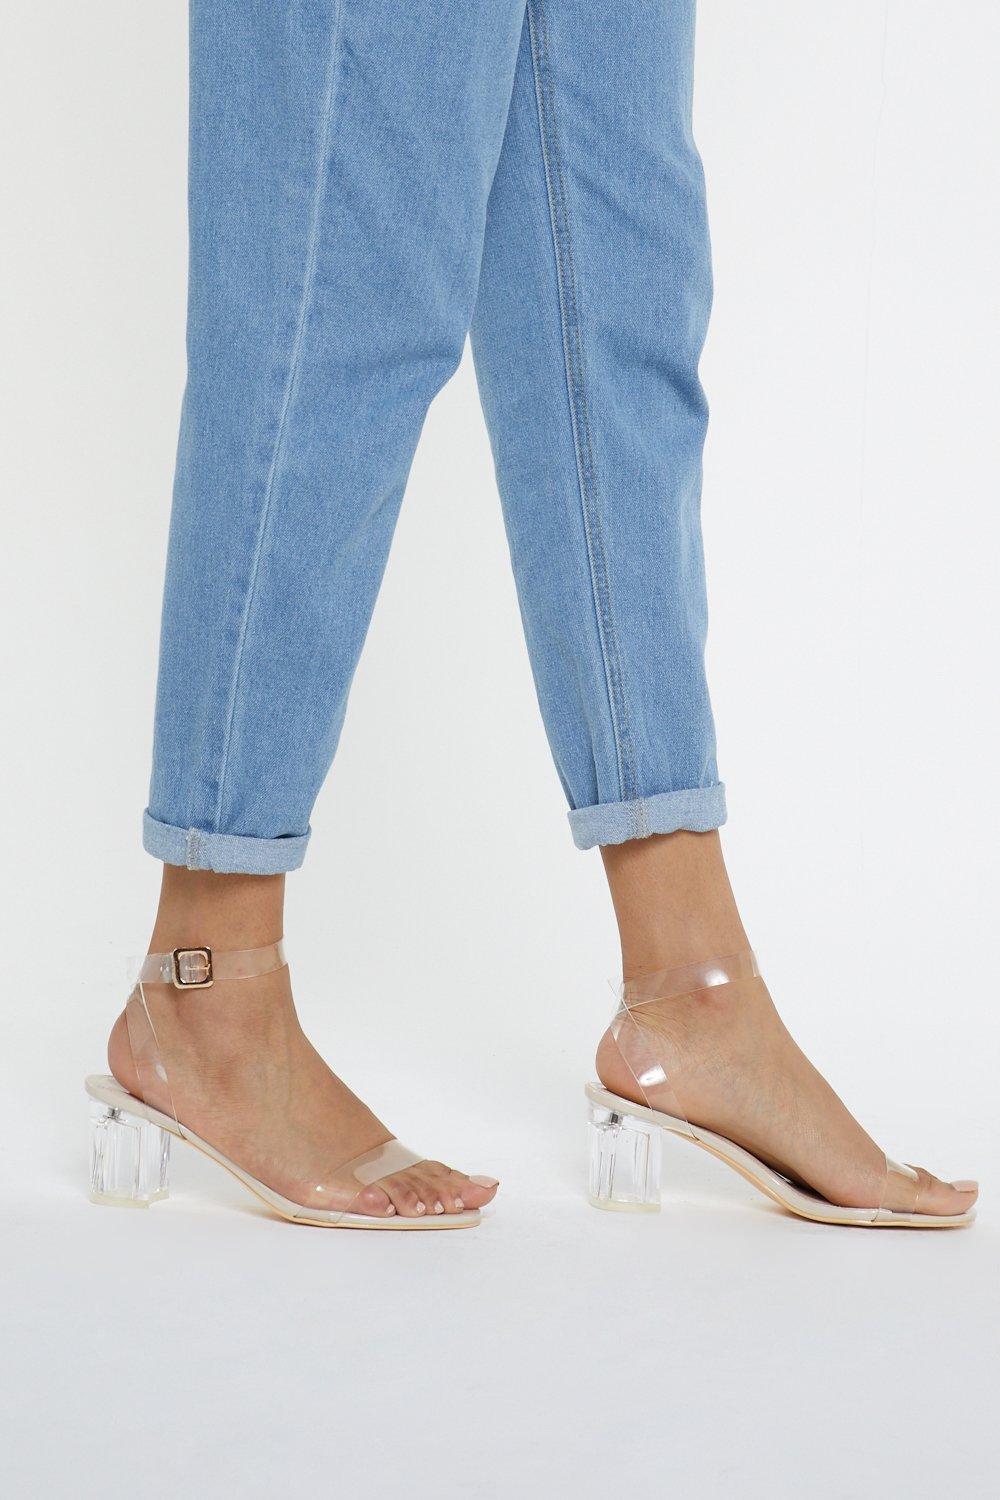 Clear Low Block Heels with Buckle 